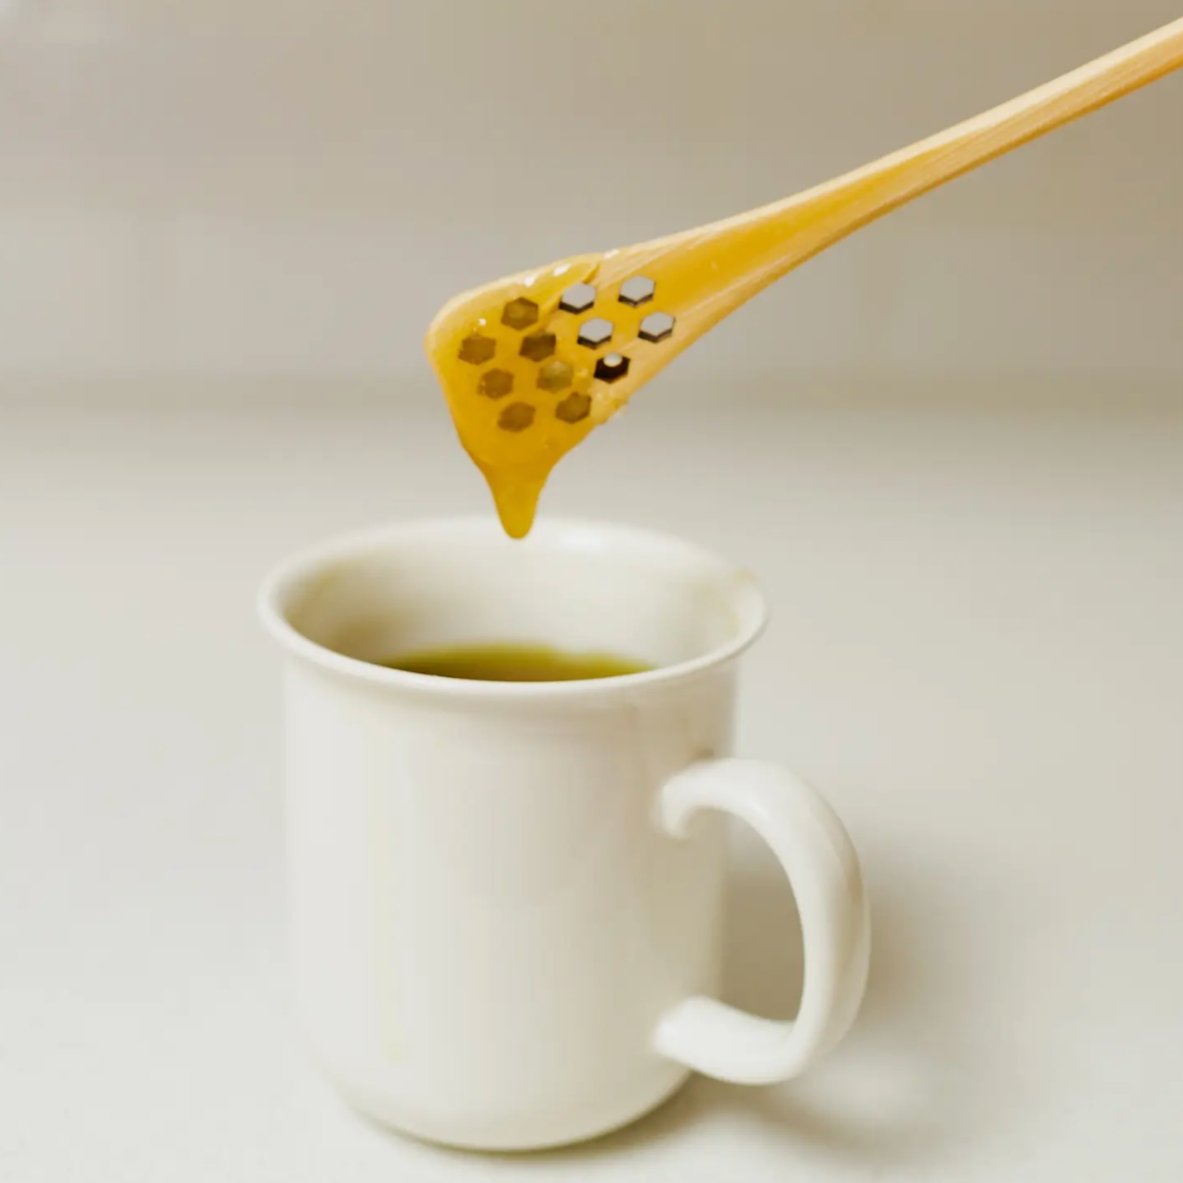 sustainable, zero waste, earth-friendly, plastic-free Honey Dipper - Bamboo Switch